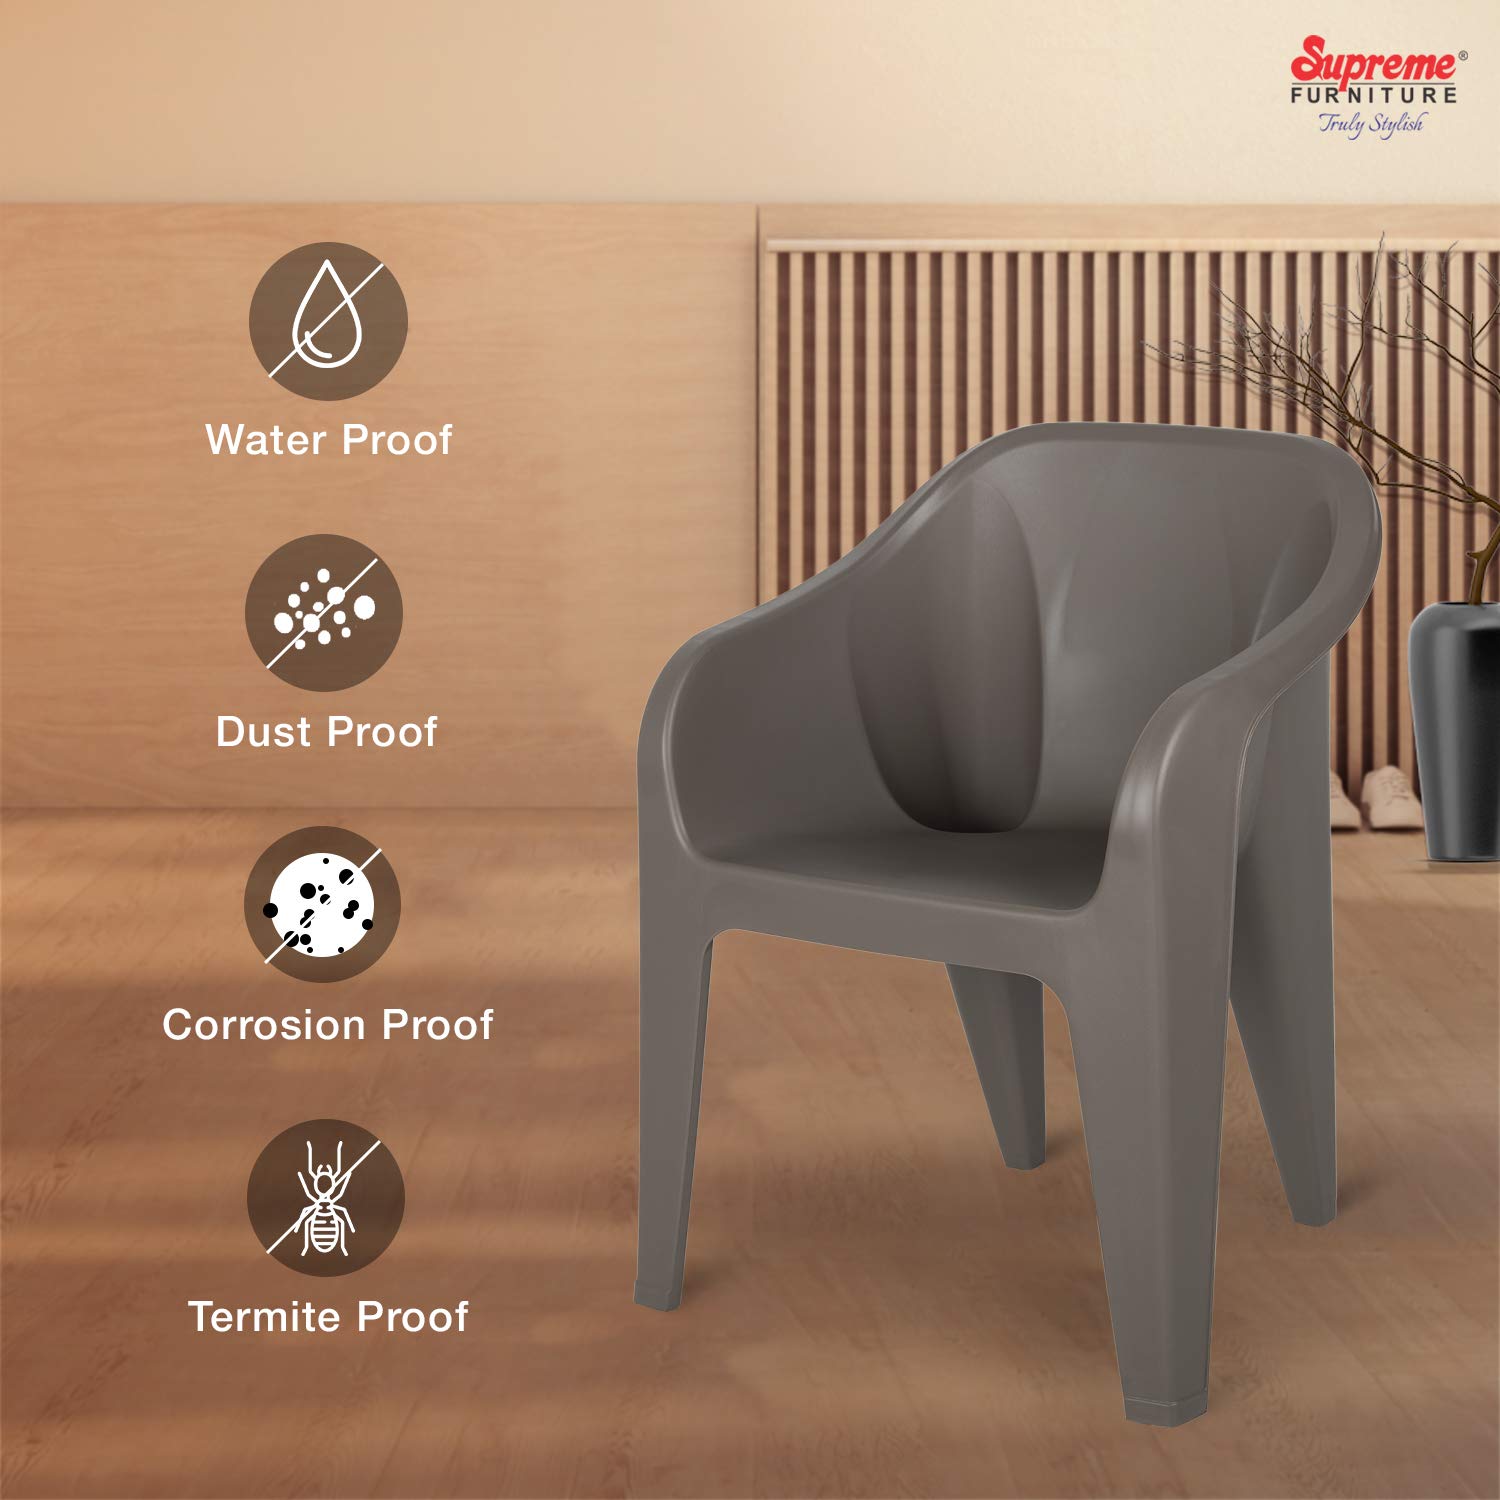 Elephant Plastic Chairs for Home and Office freeshipping - Zit Electronics Store